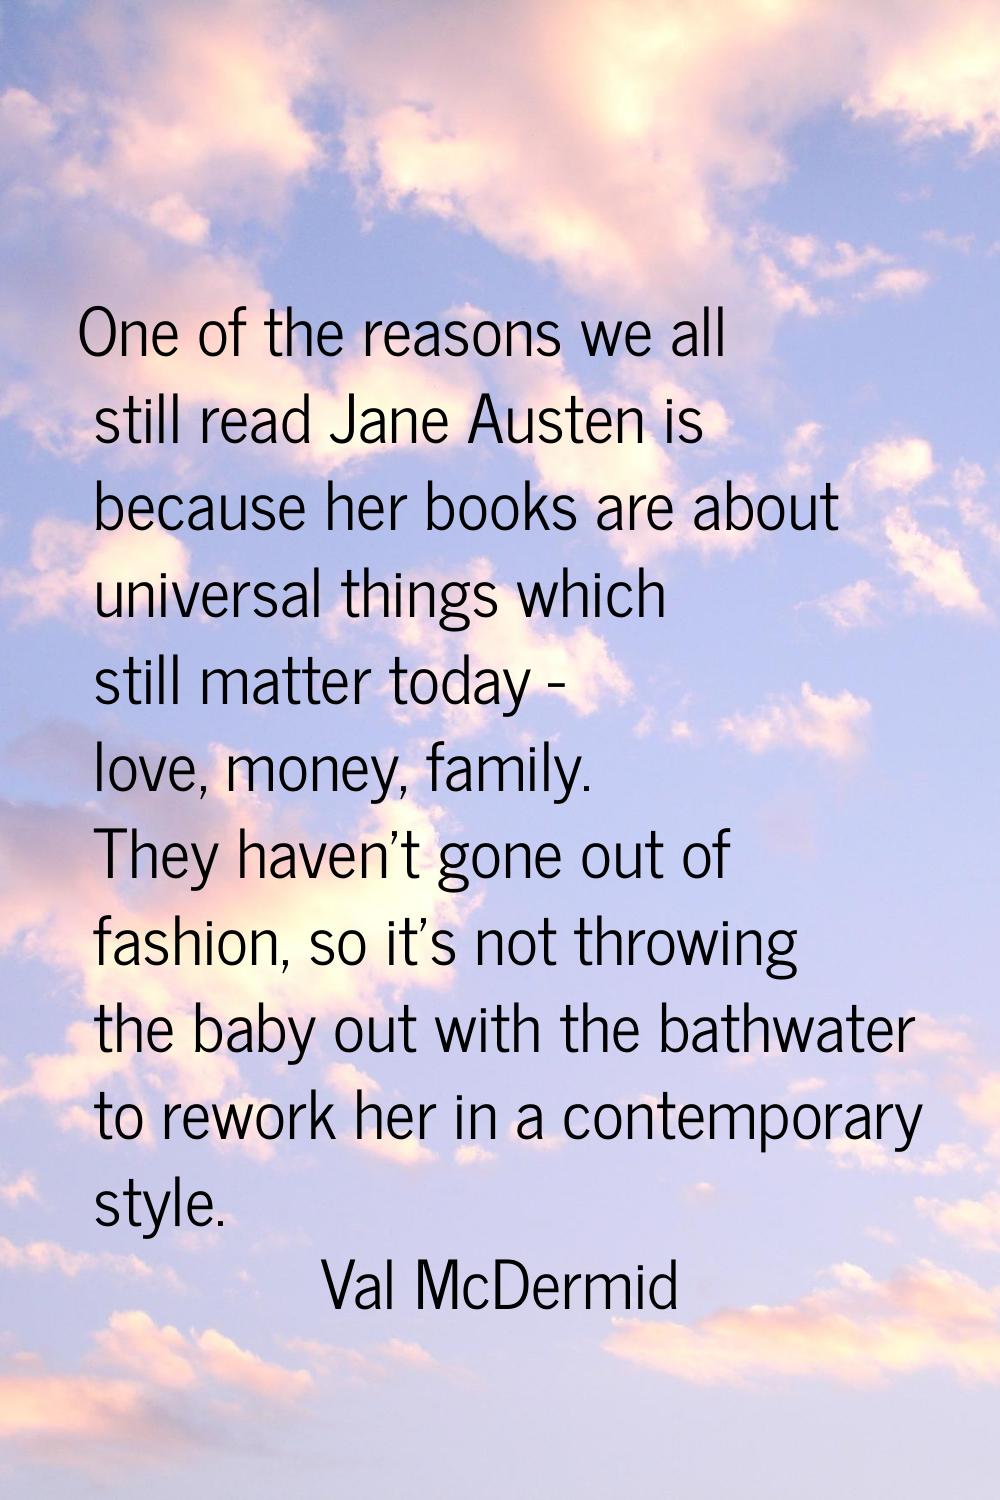 One of the reasons we all still read Jane Austen is because her books are about universal things wh